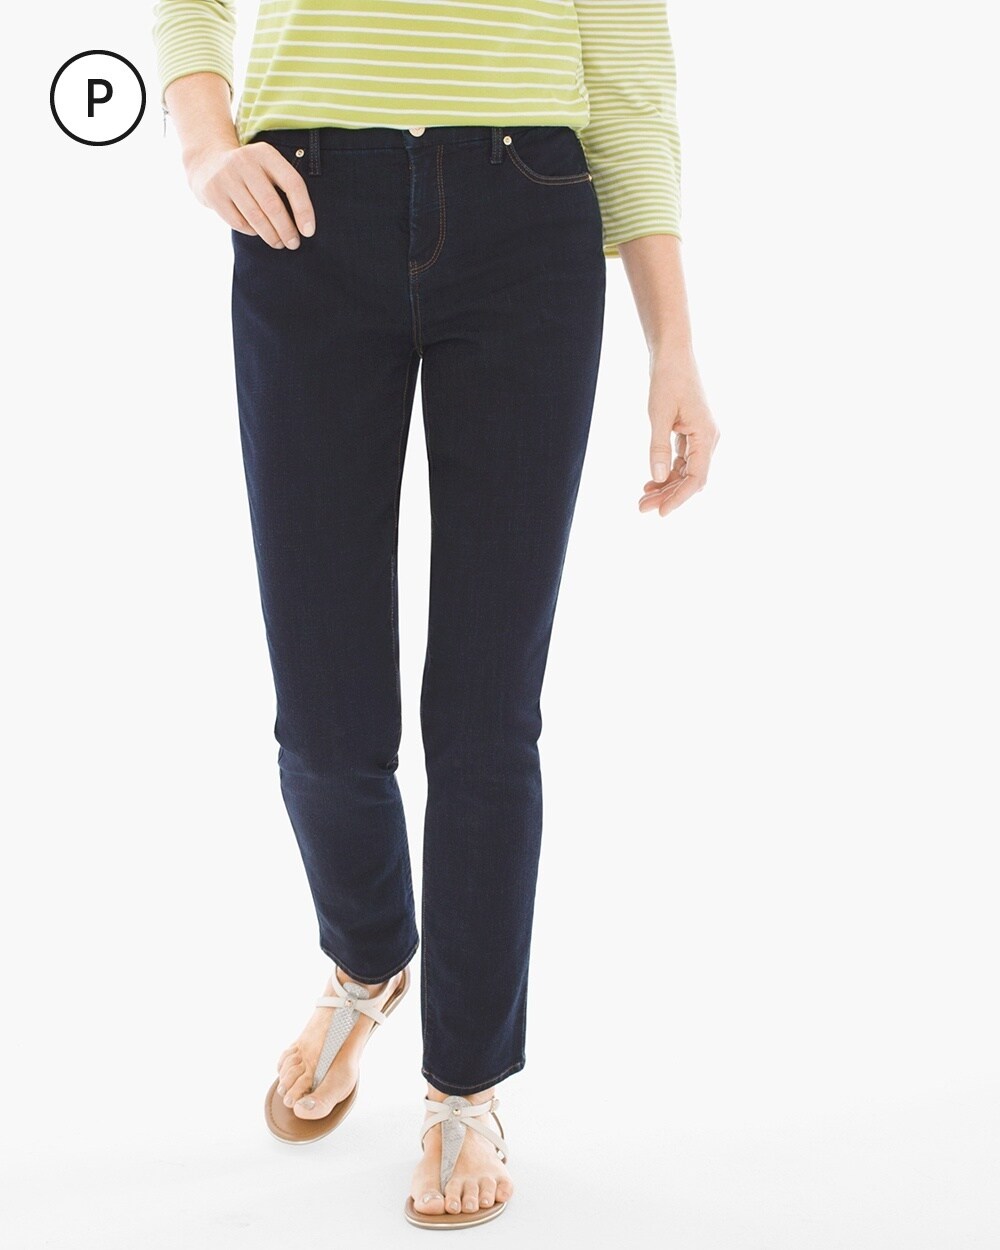 So Slimming Petite Girlfriend Ankle Jeans - Chico's